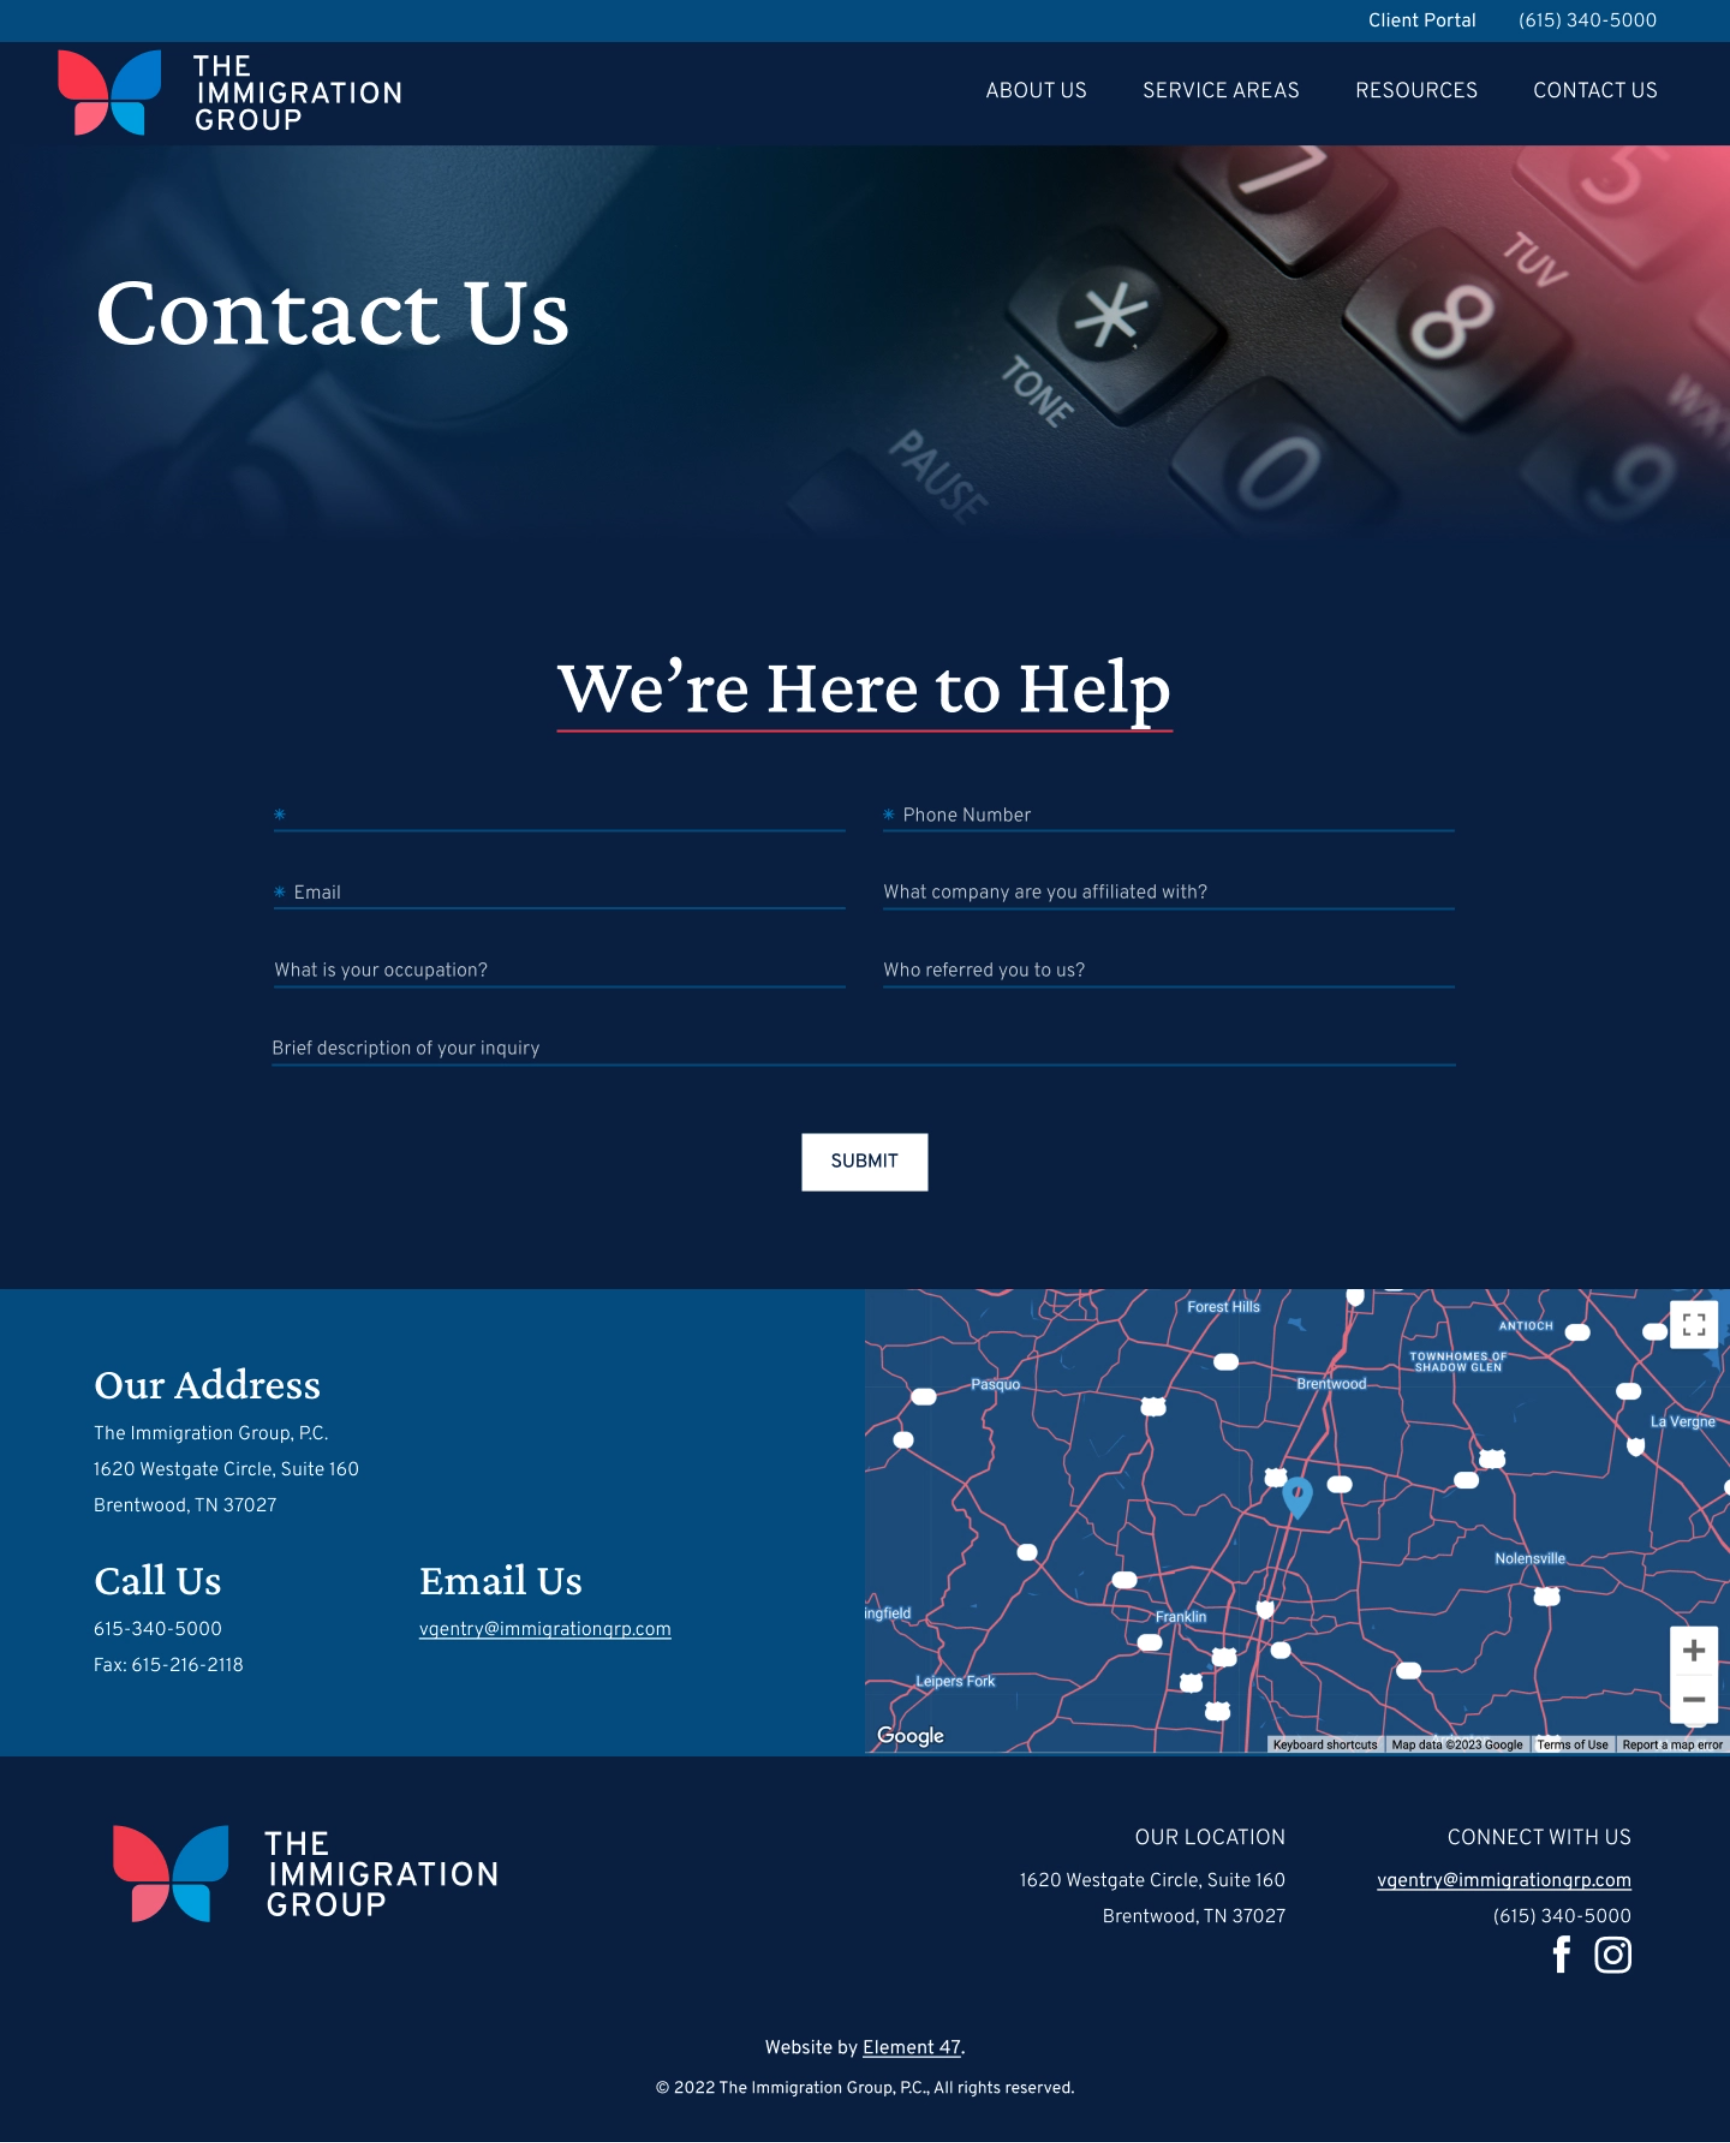 The Immigration Group contact page design